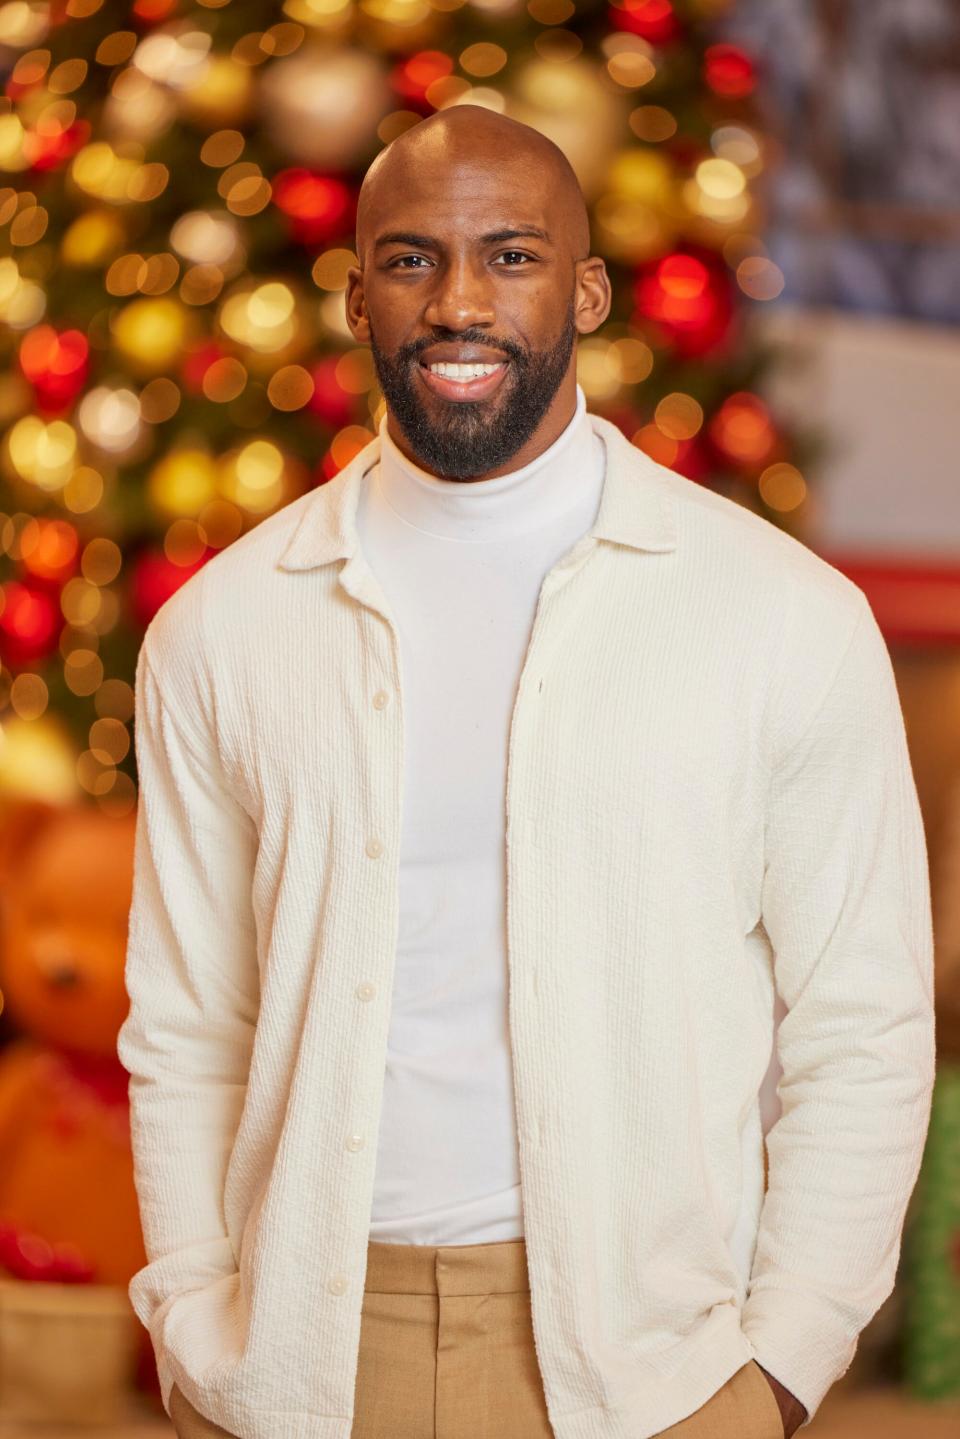 Xavier Prather, "Big Brother" season 23 winner, is a contestants on "Big Brother Reindeer Games." He has survived four "Santa's Showdowns" to advance to the season finale on Thursday.